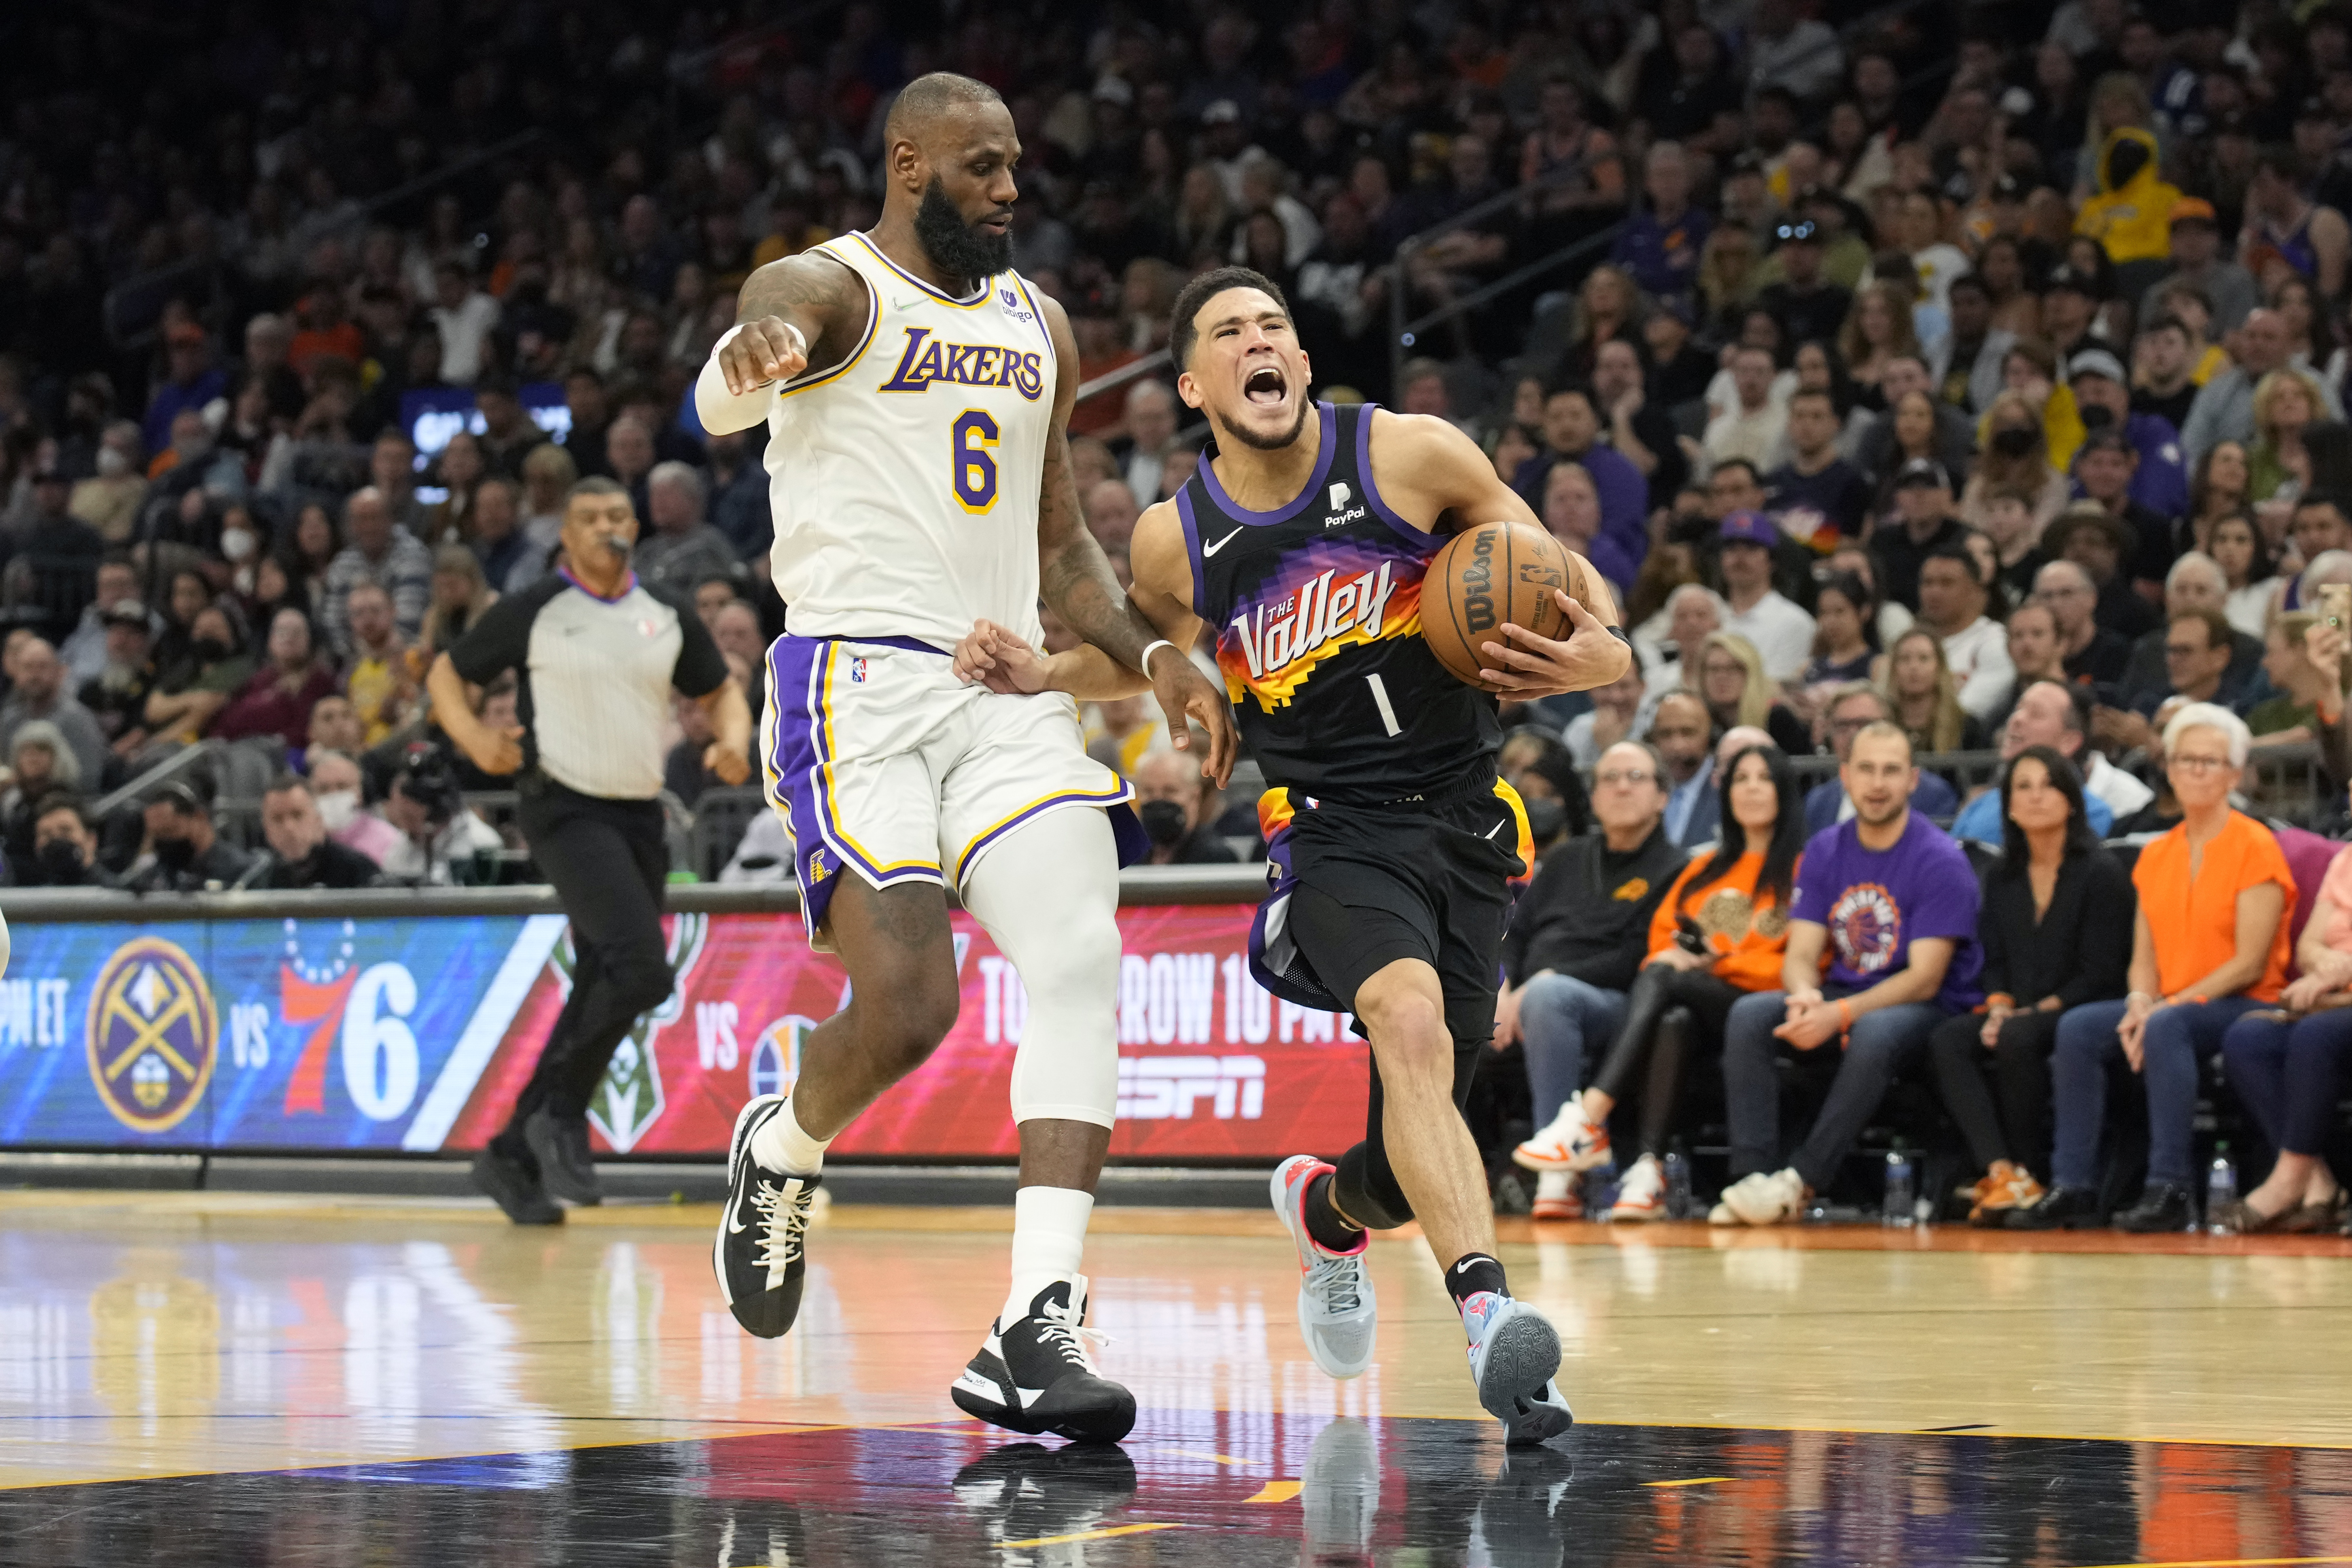 Devin Booker hasn't been himself yet, and that's just fine